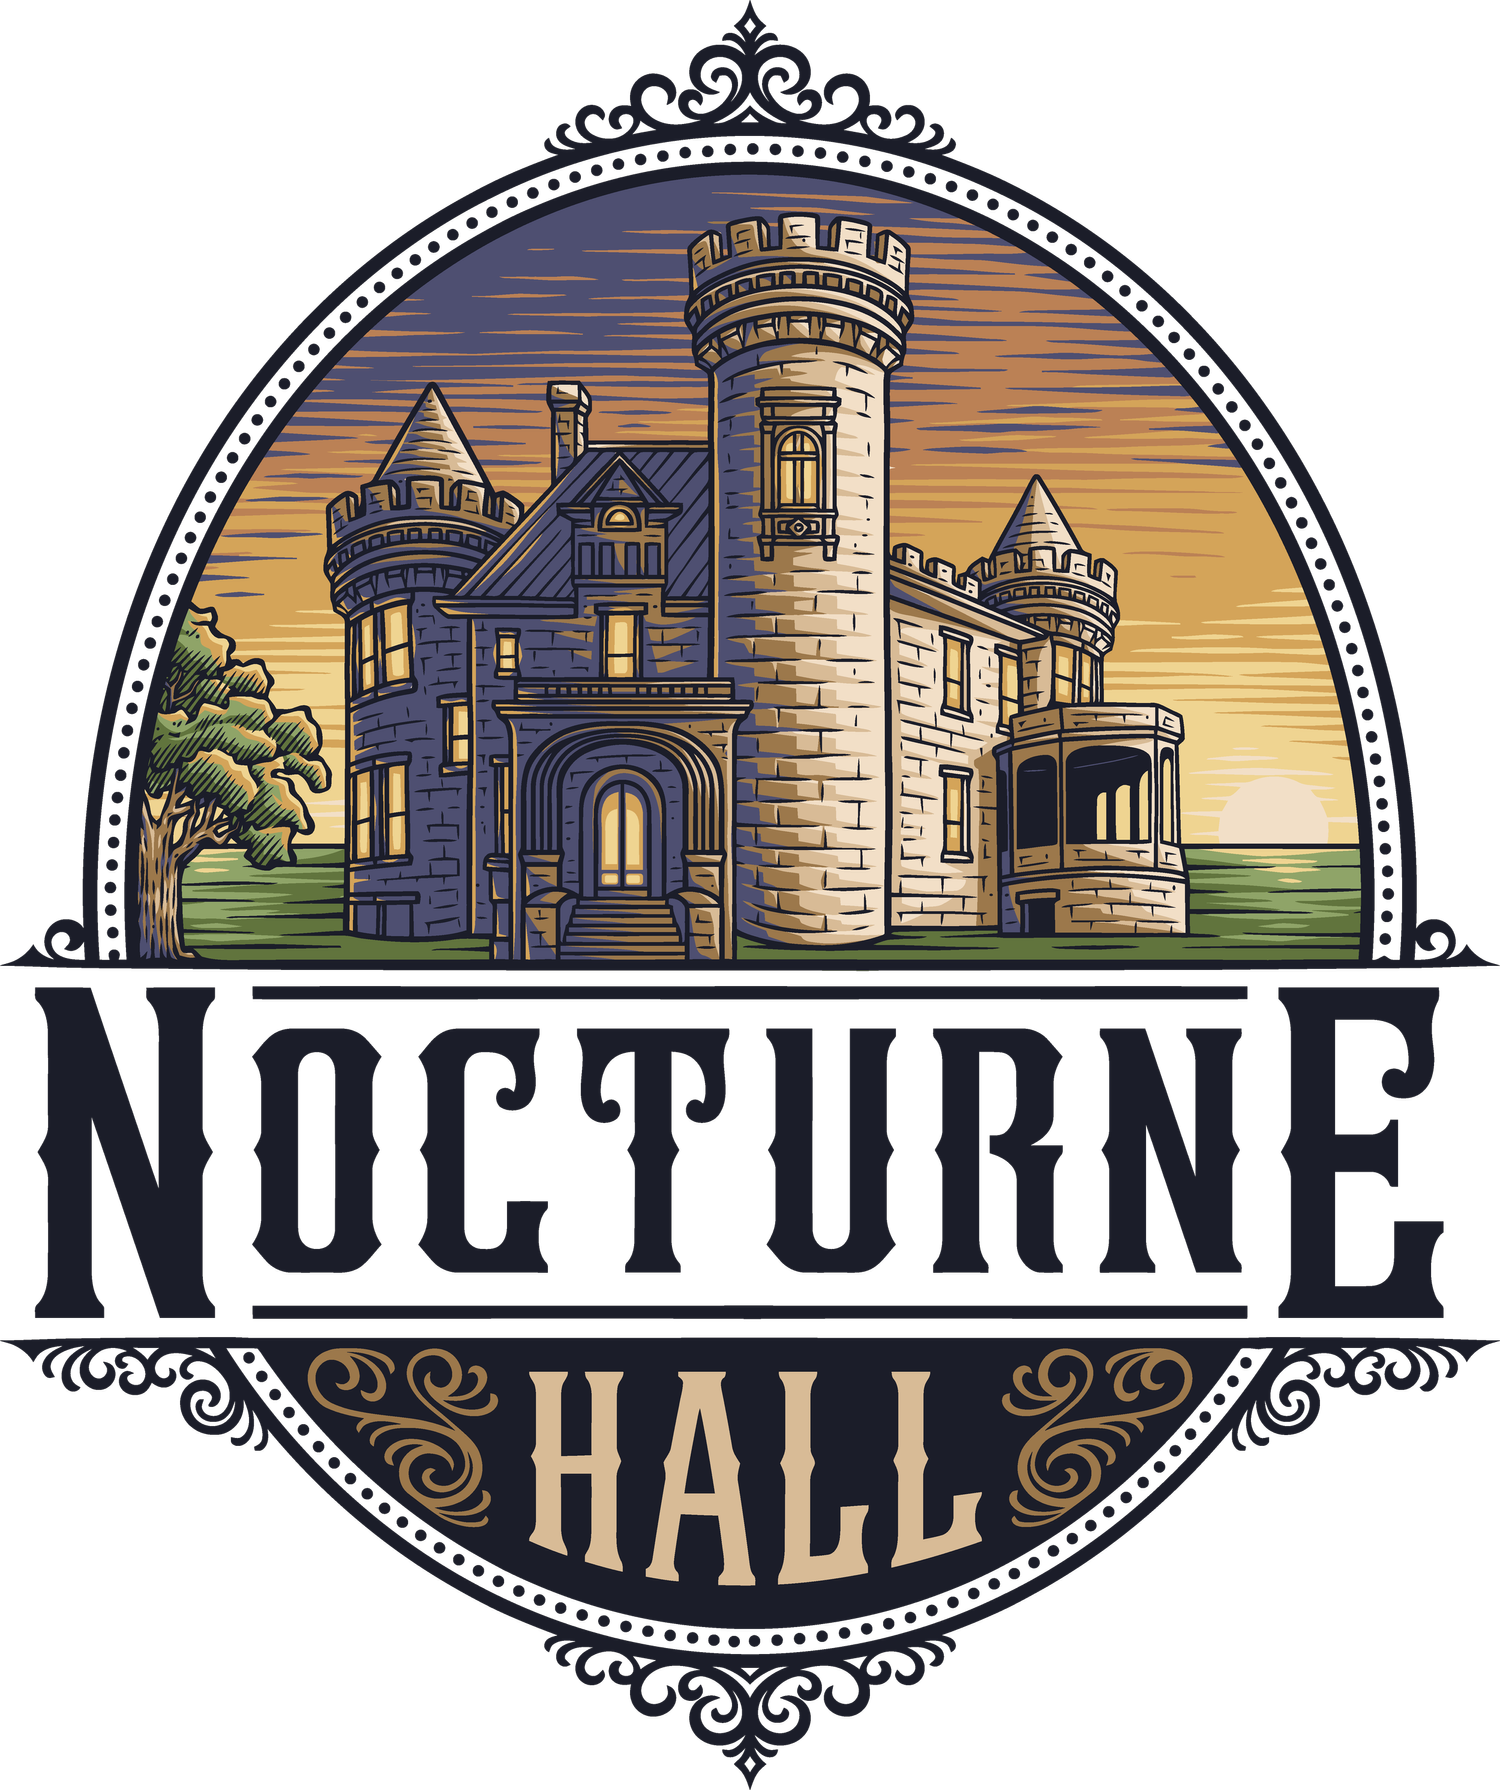 Nocturne Hall